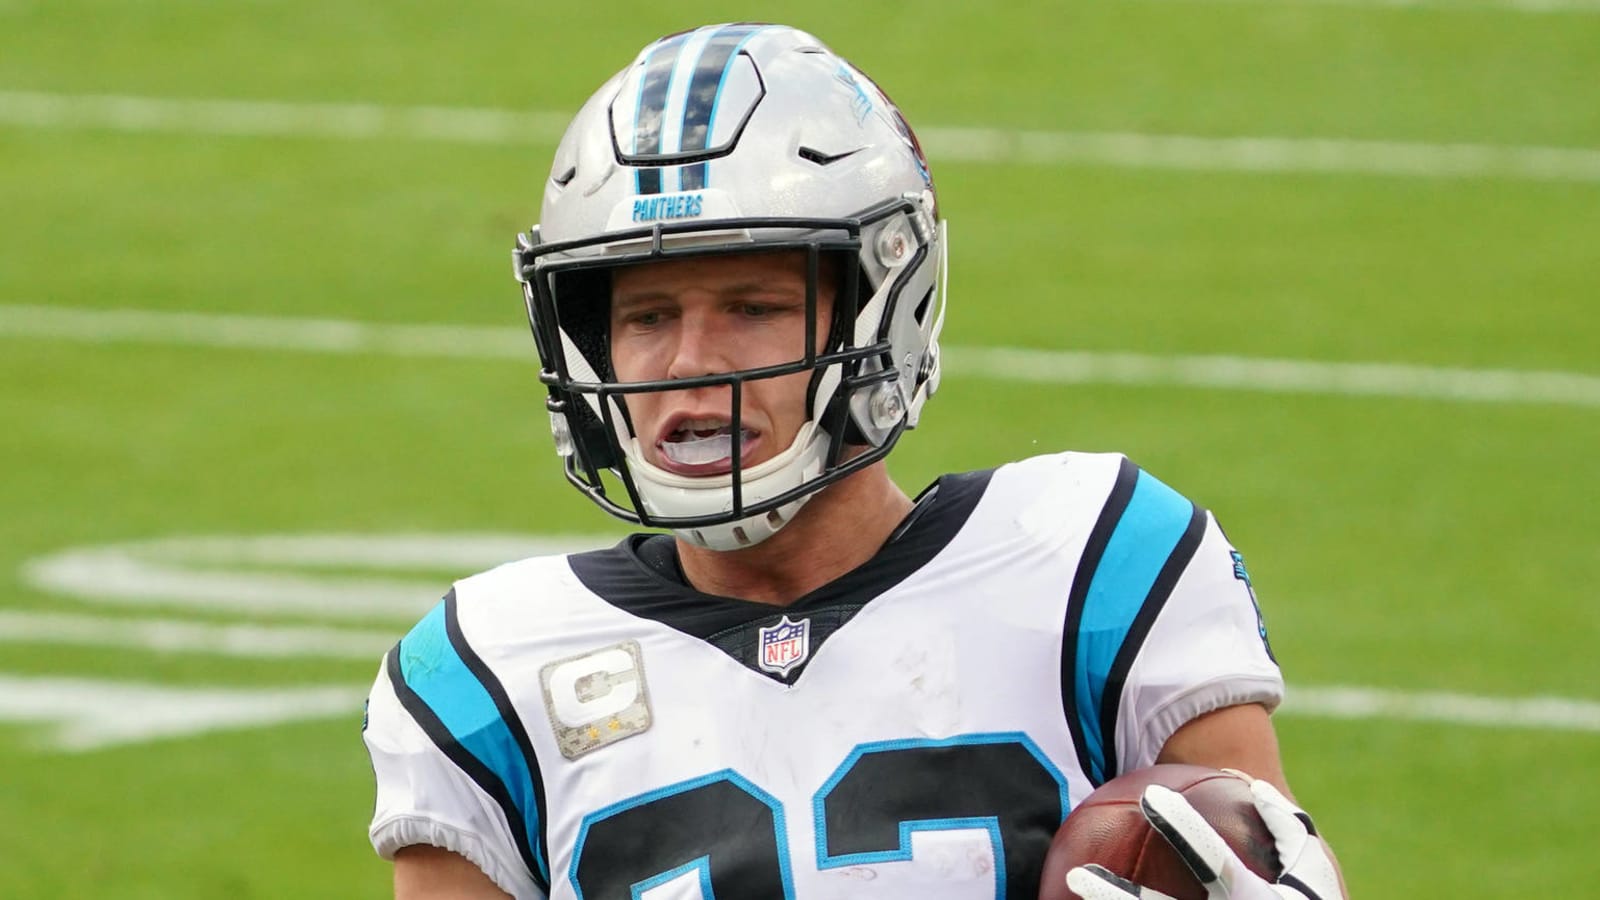 Panthers All-Pro RB Christian McCaffrey likely out for Packers game